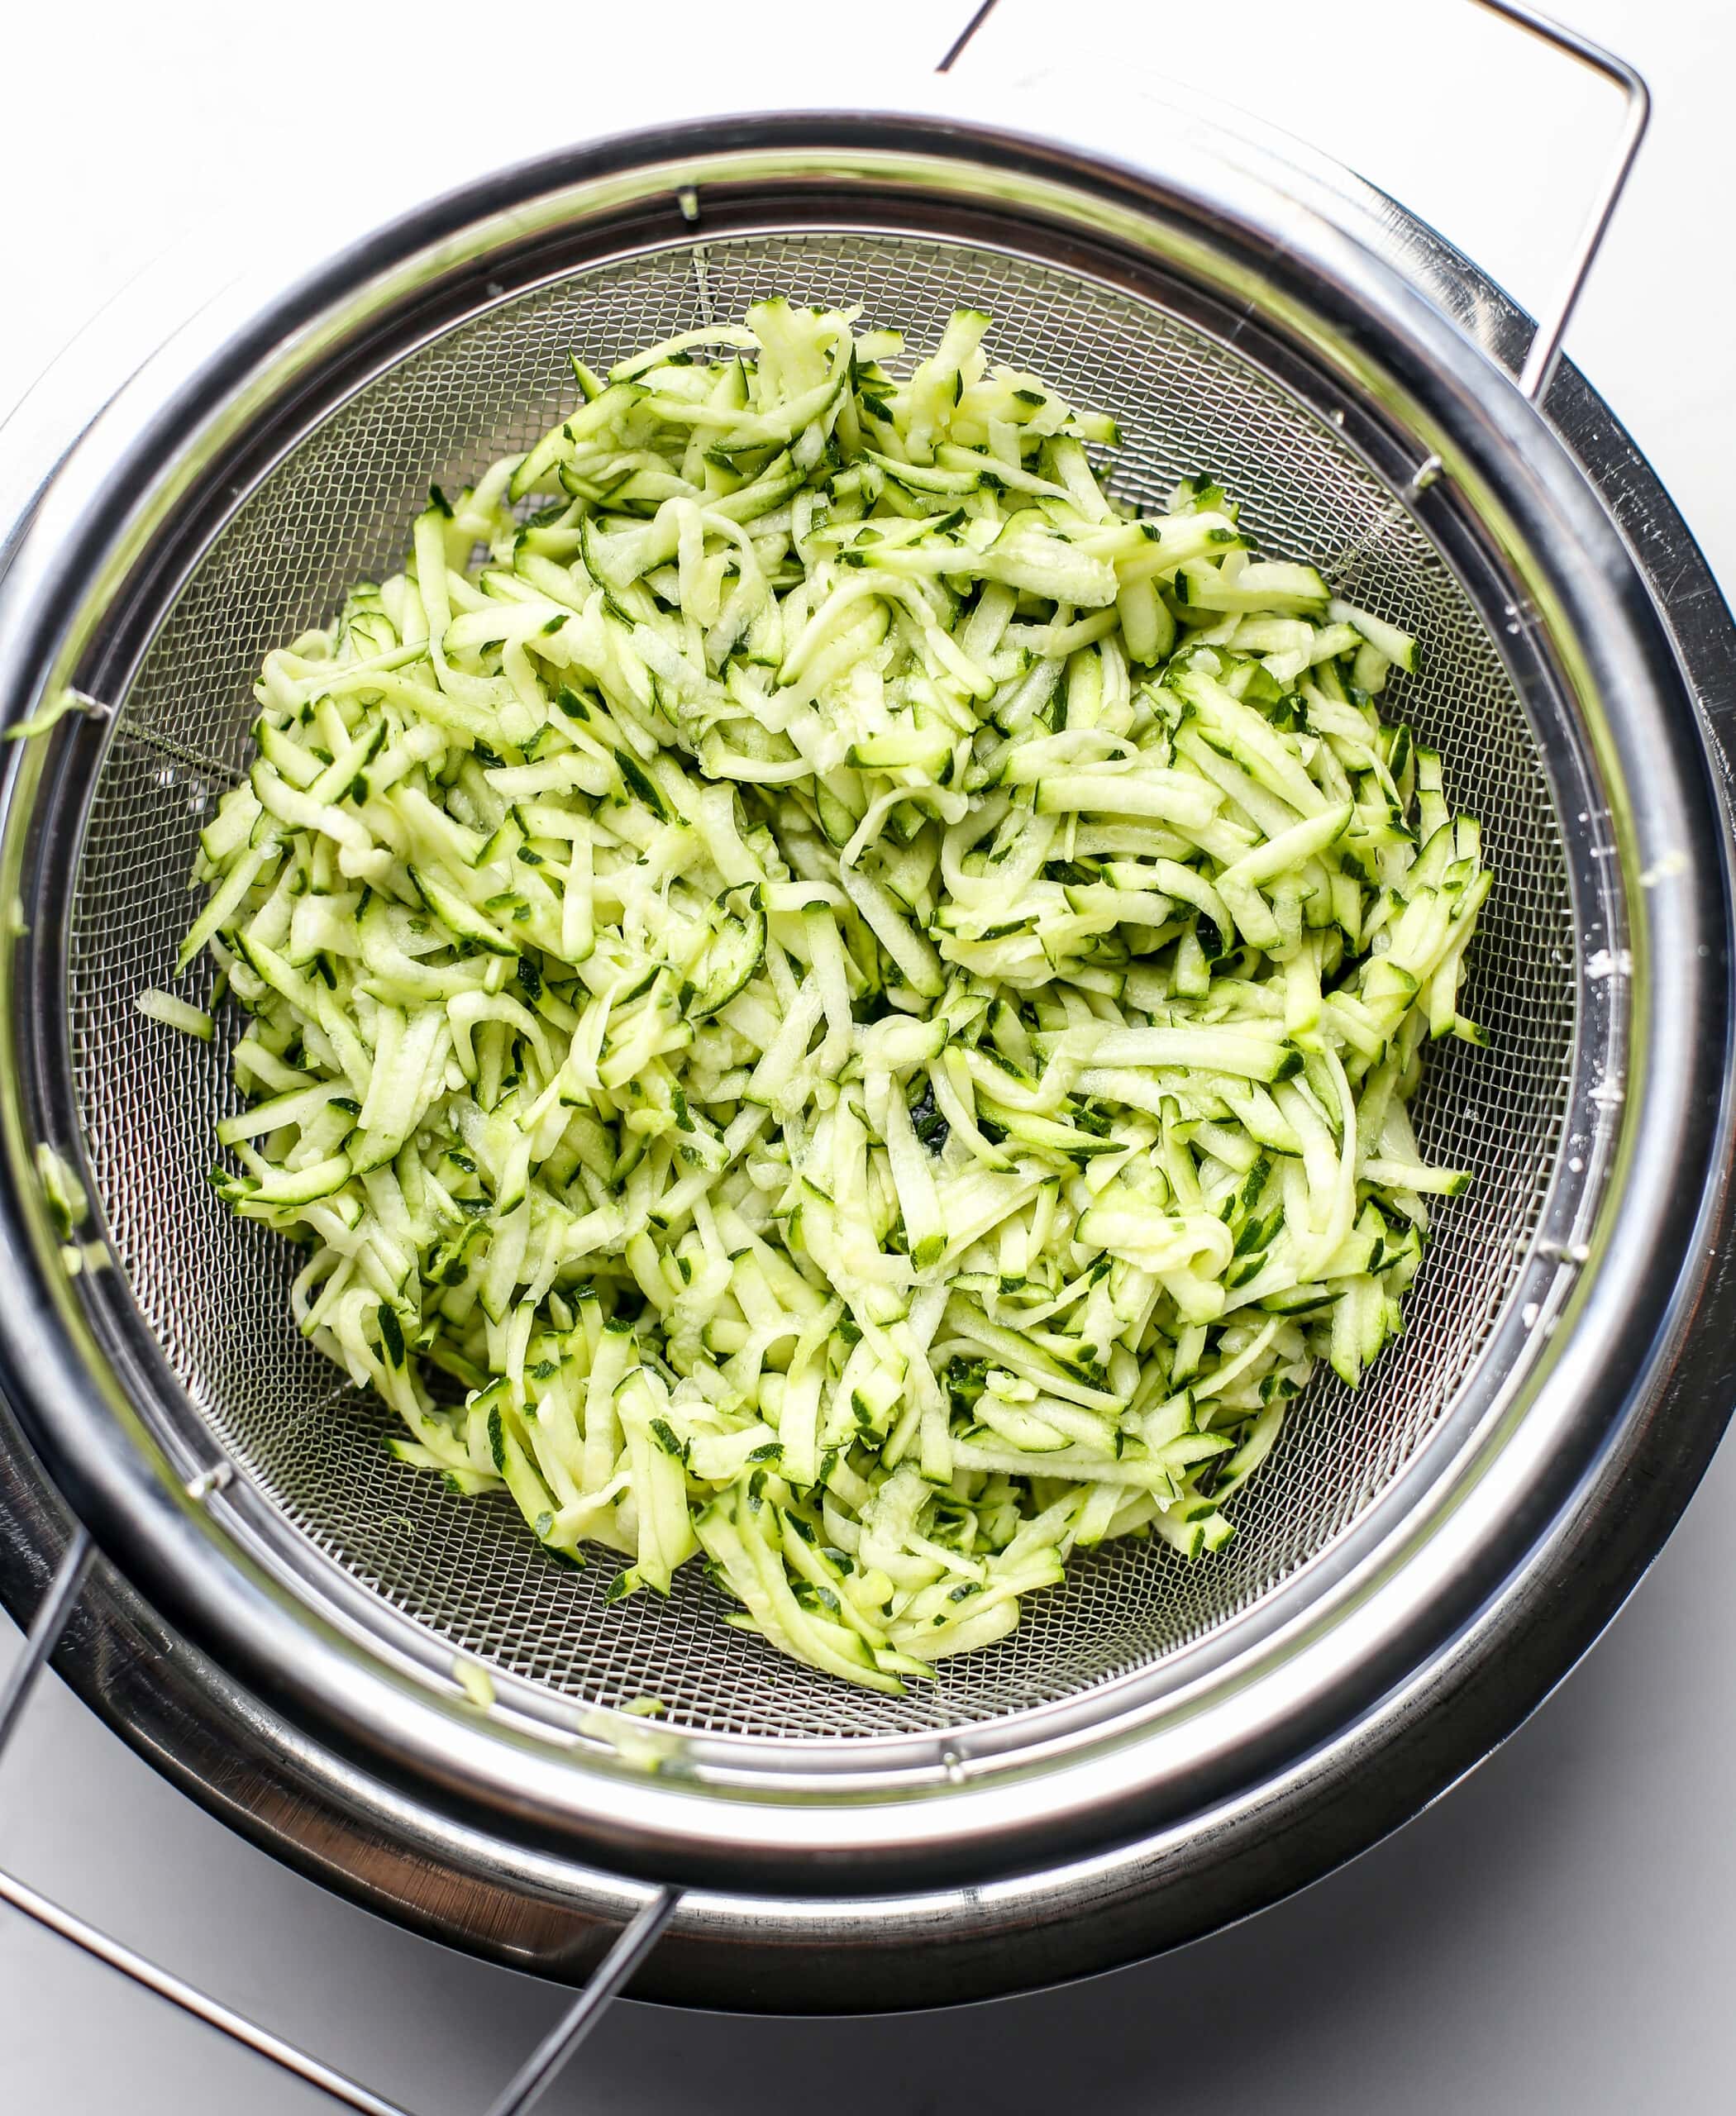 Shredded zucchini in a fine mesh strainer with a stainless steel bowl underneath.